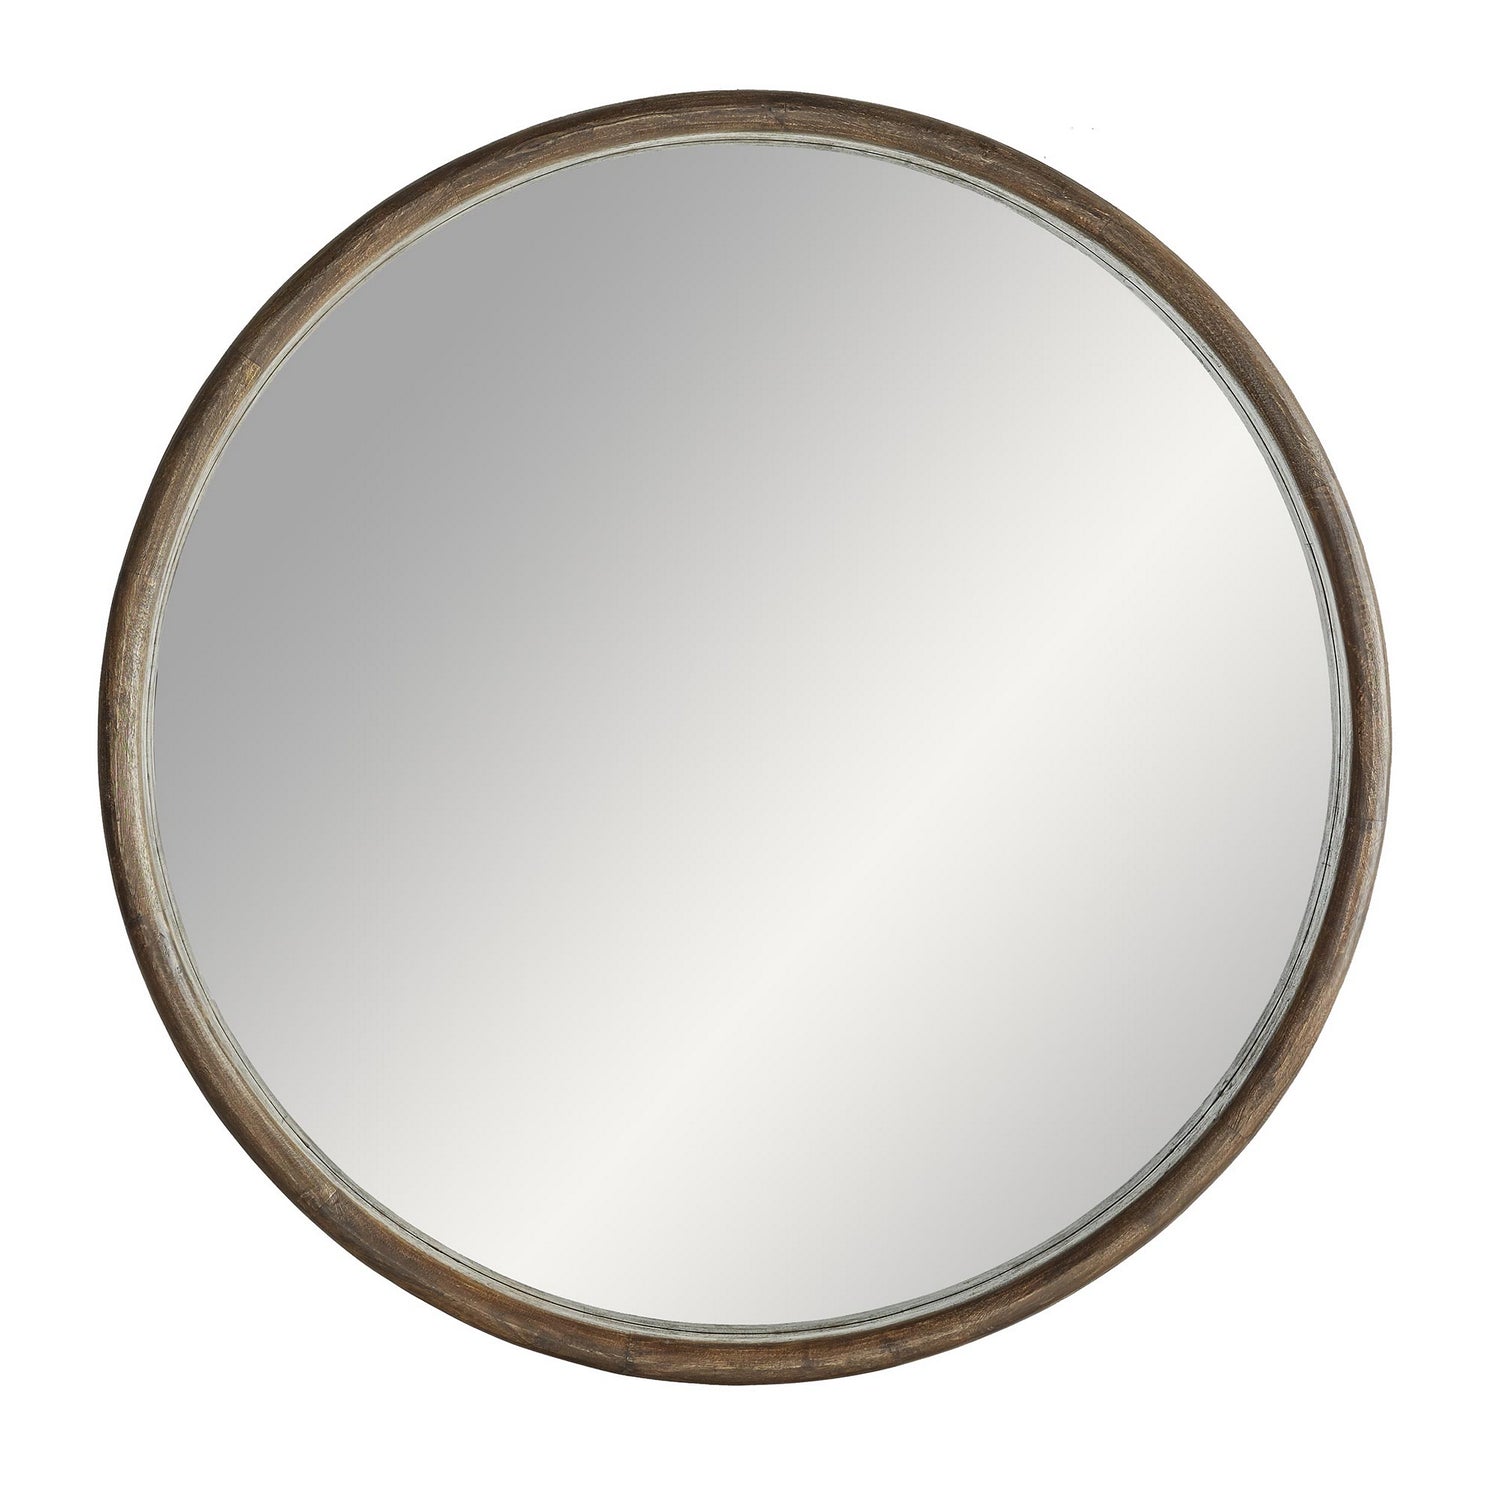 Mirror from the Lesley collection in Light Walnut finish